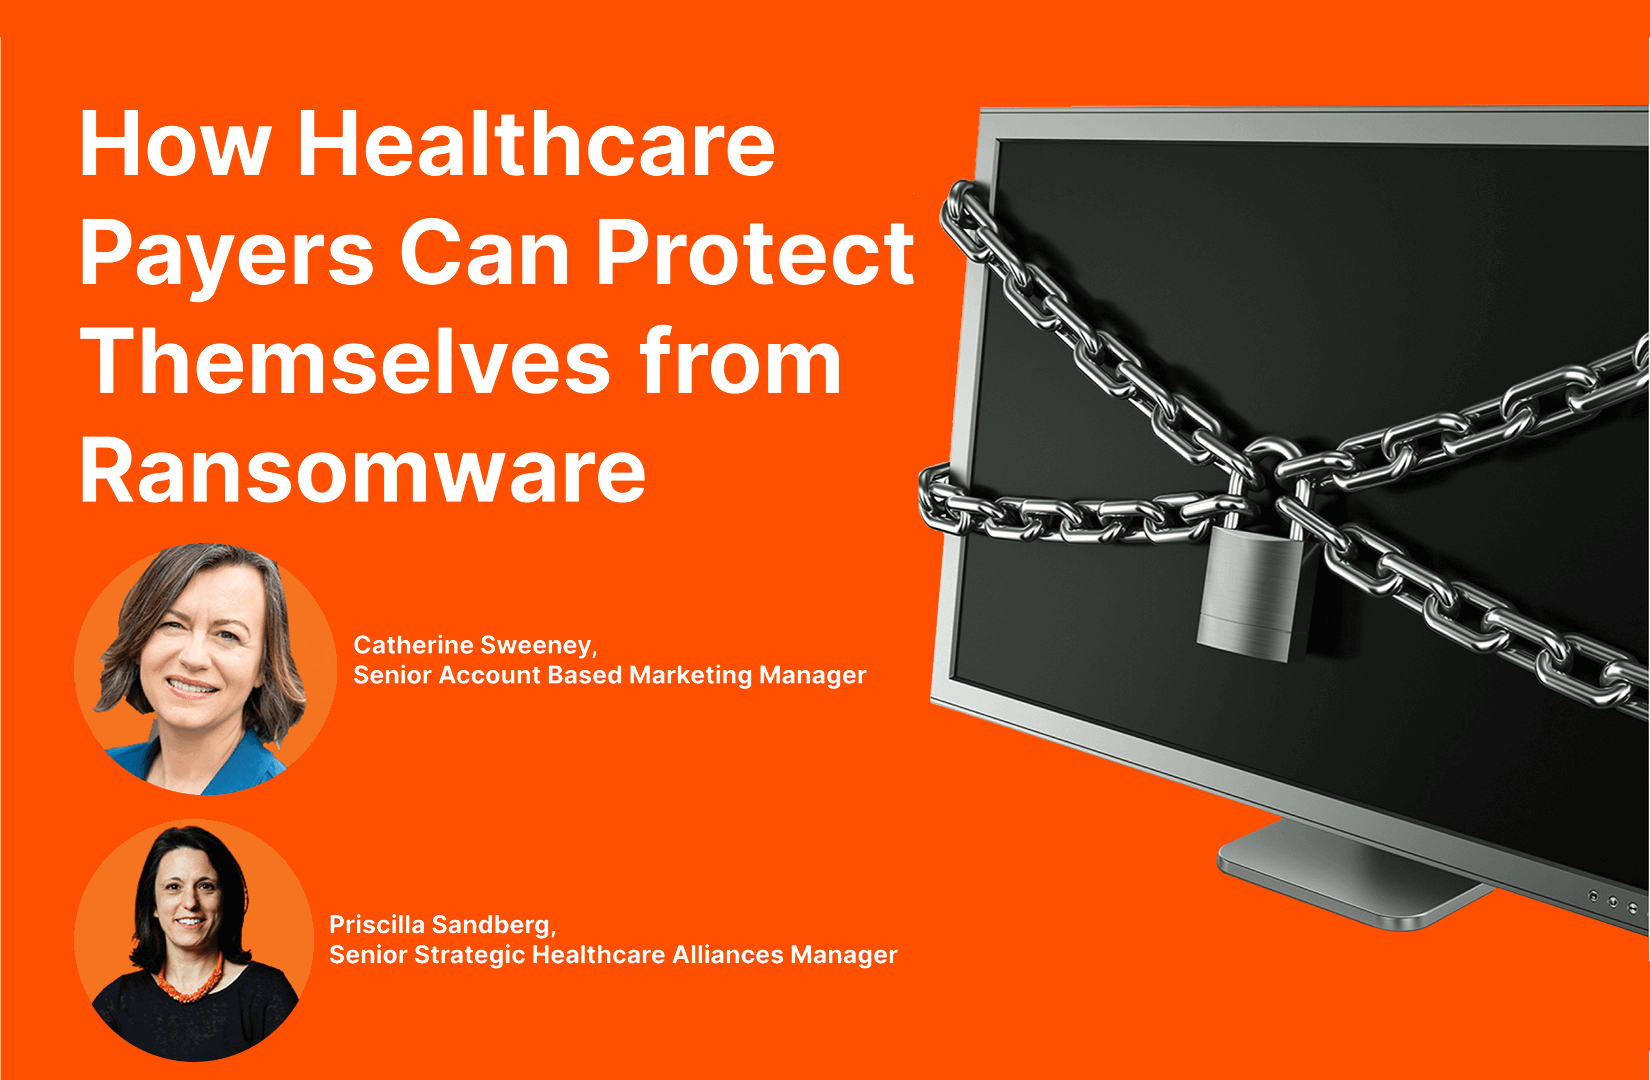 Ransomware and Healthcare